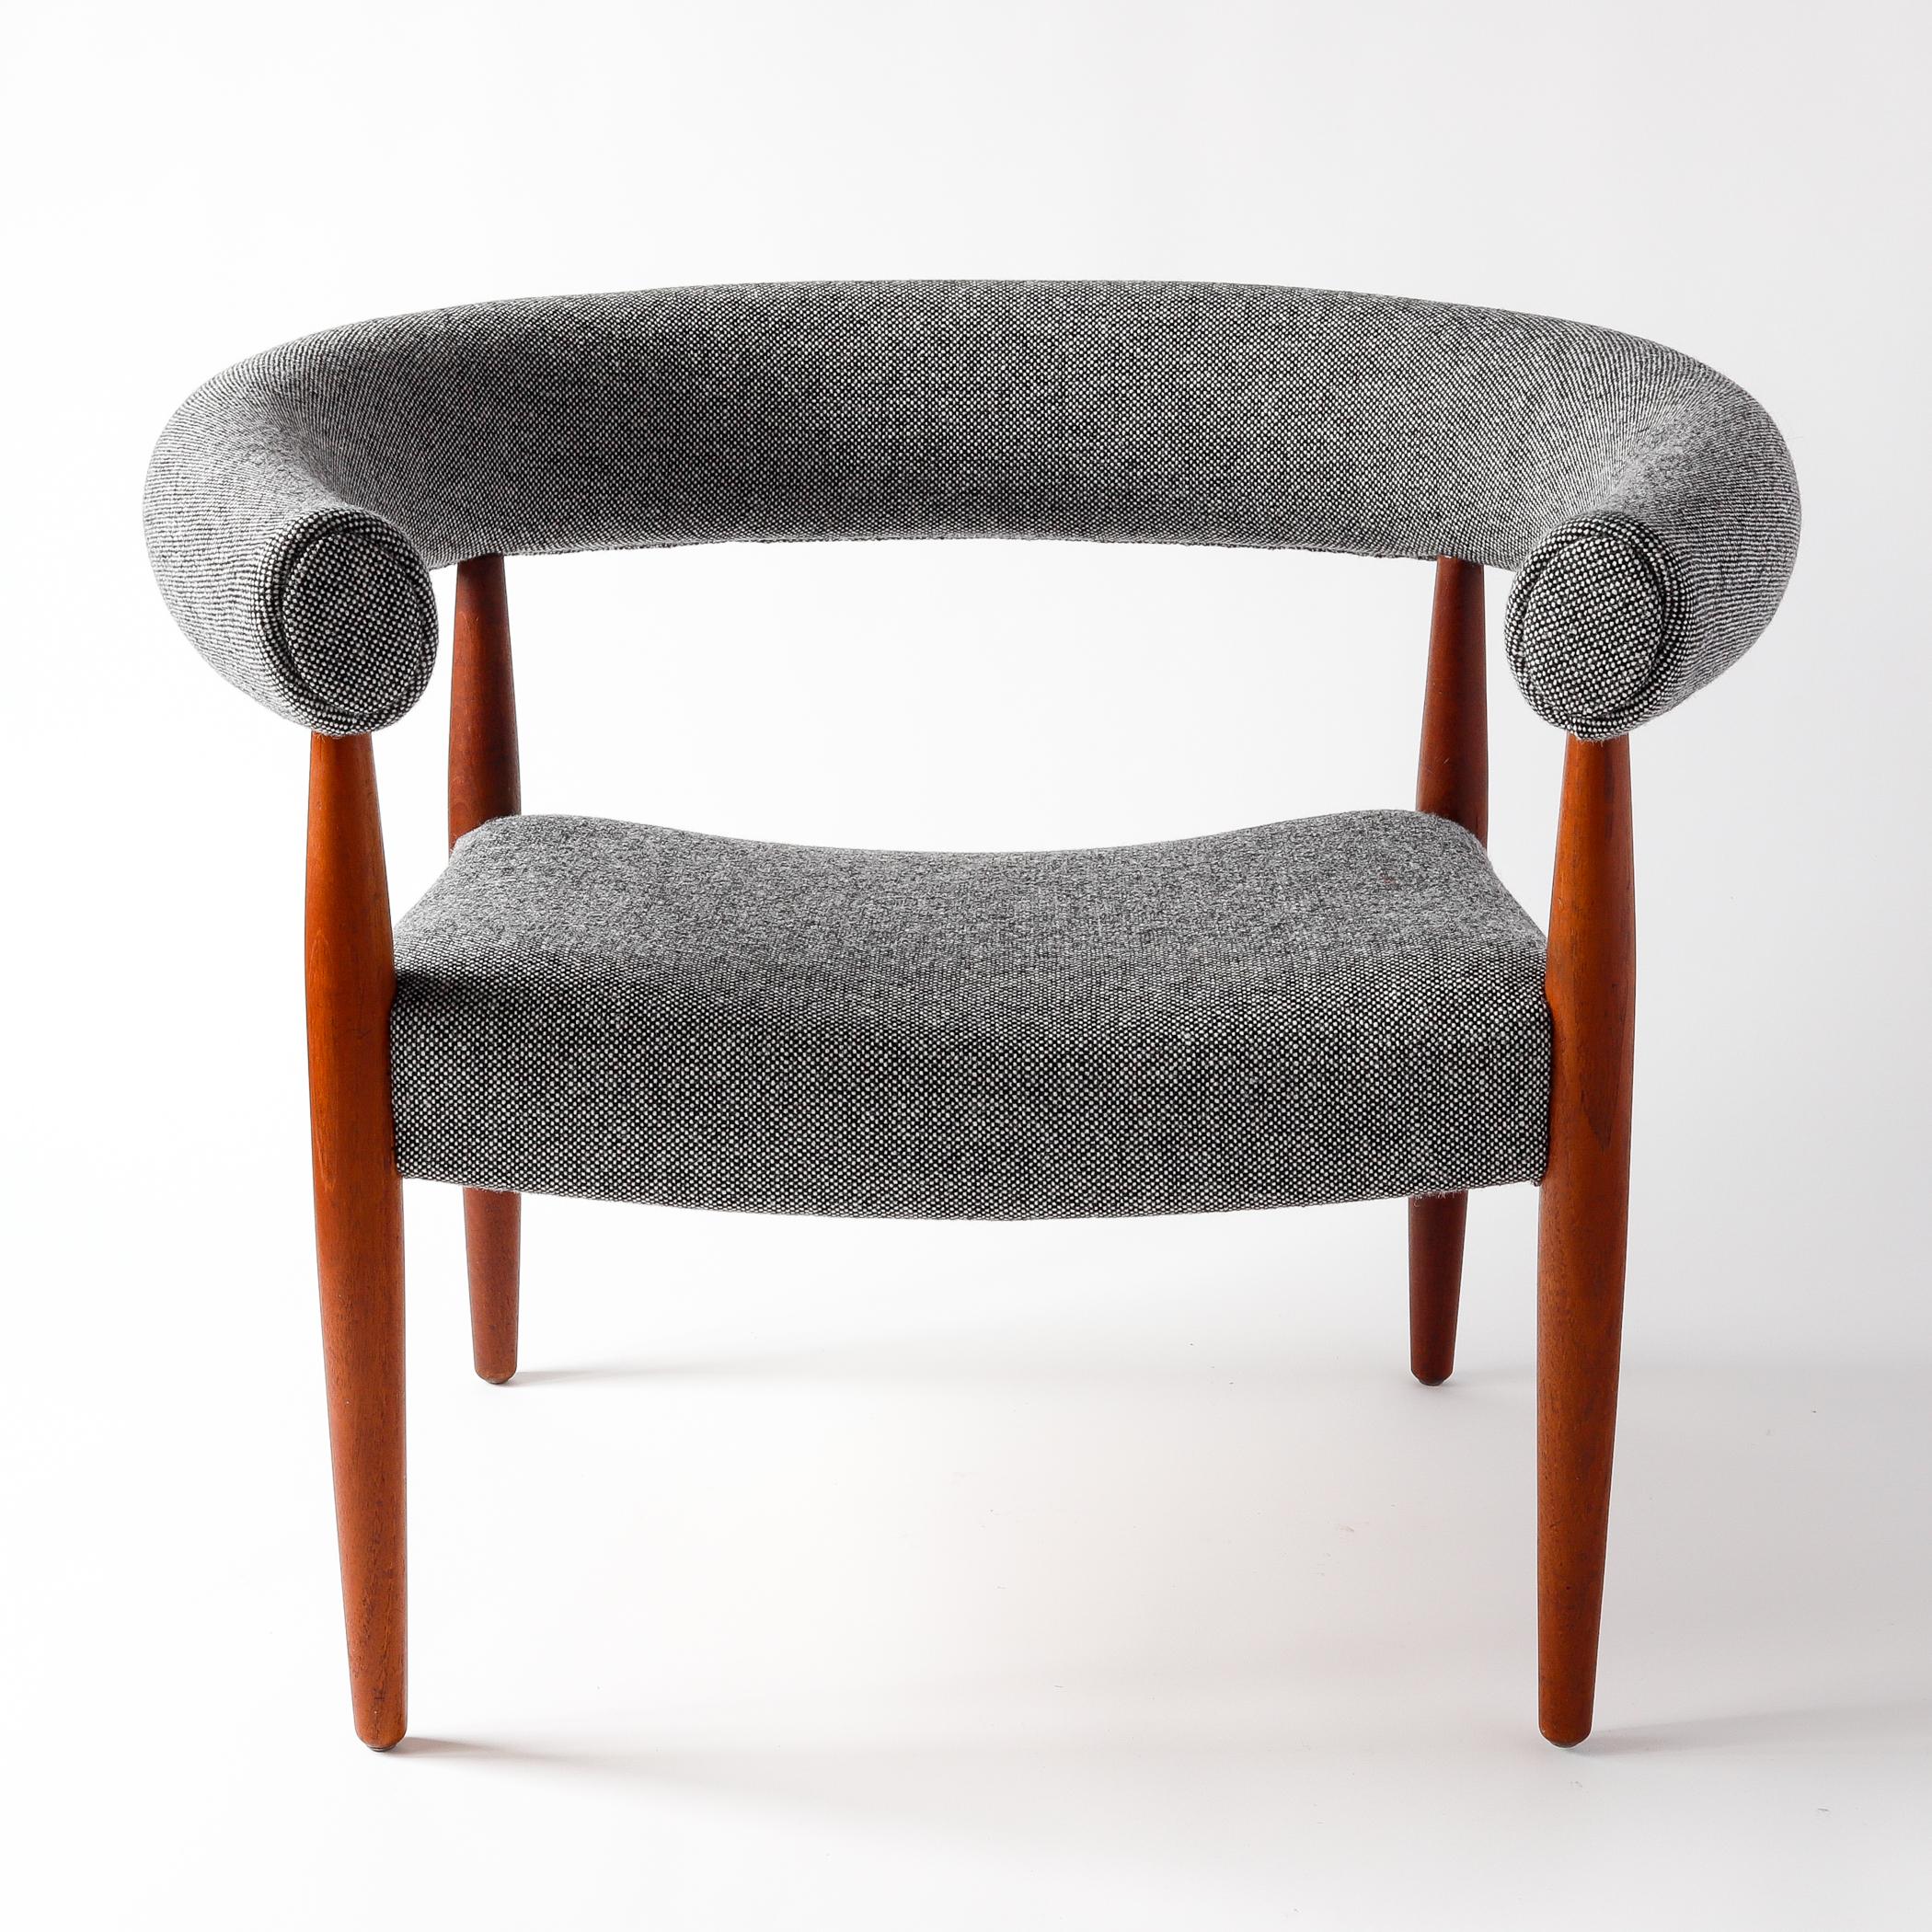 This midcentury Danish Modern upholstered armchair was designed by Nanna Ditzel (1923-2005) for Kold Savvaerk in 1958 and was called a Pølsestol, or sausage chair (it is also called a ring chair). Working with her husband Jørgen through the 1940s